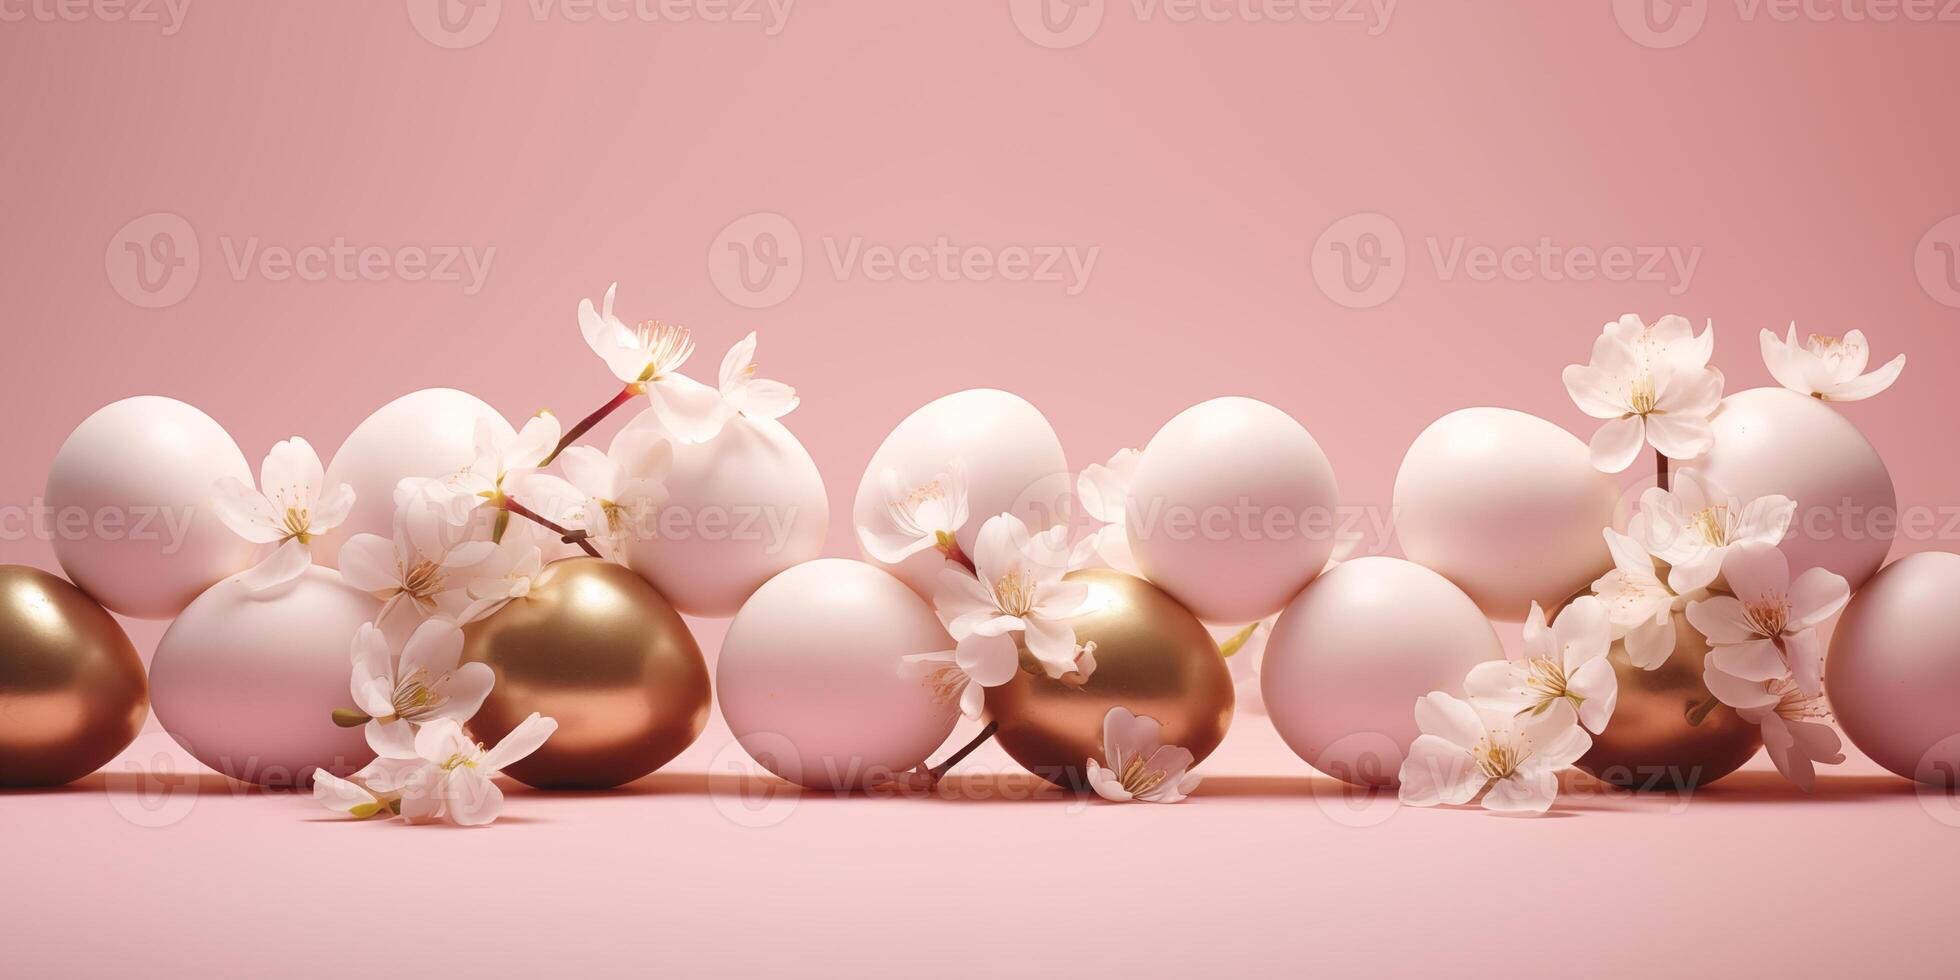 Golden and white eggs with white flowers on a pink background. Generated by Artificial Intelligence photo